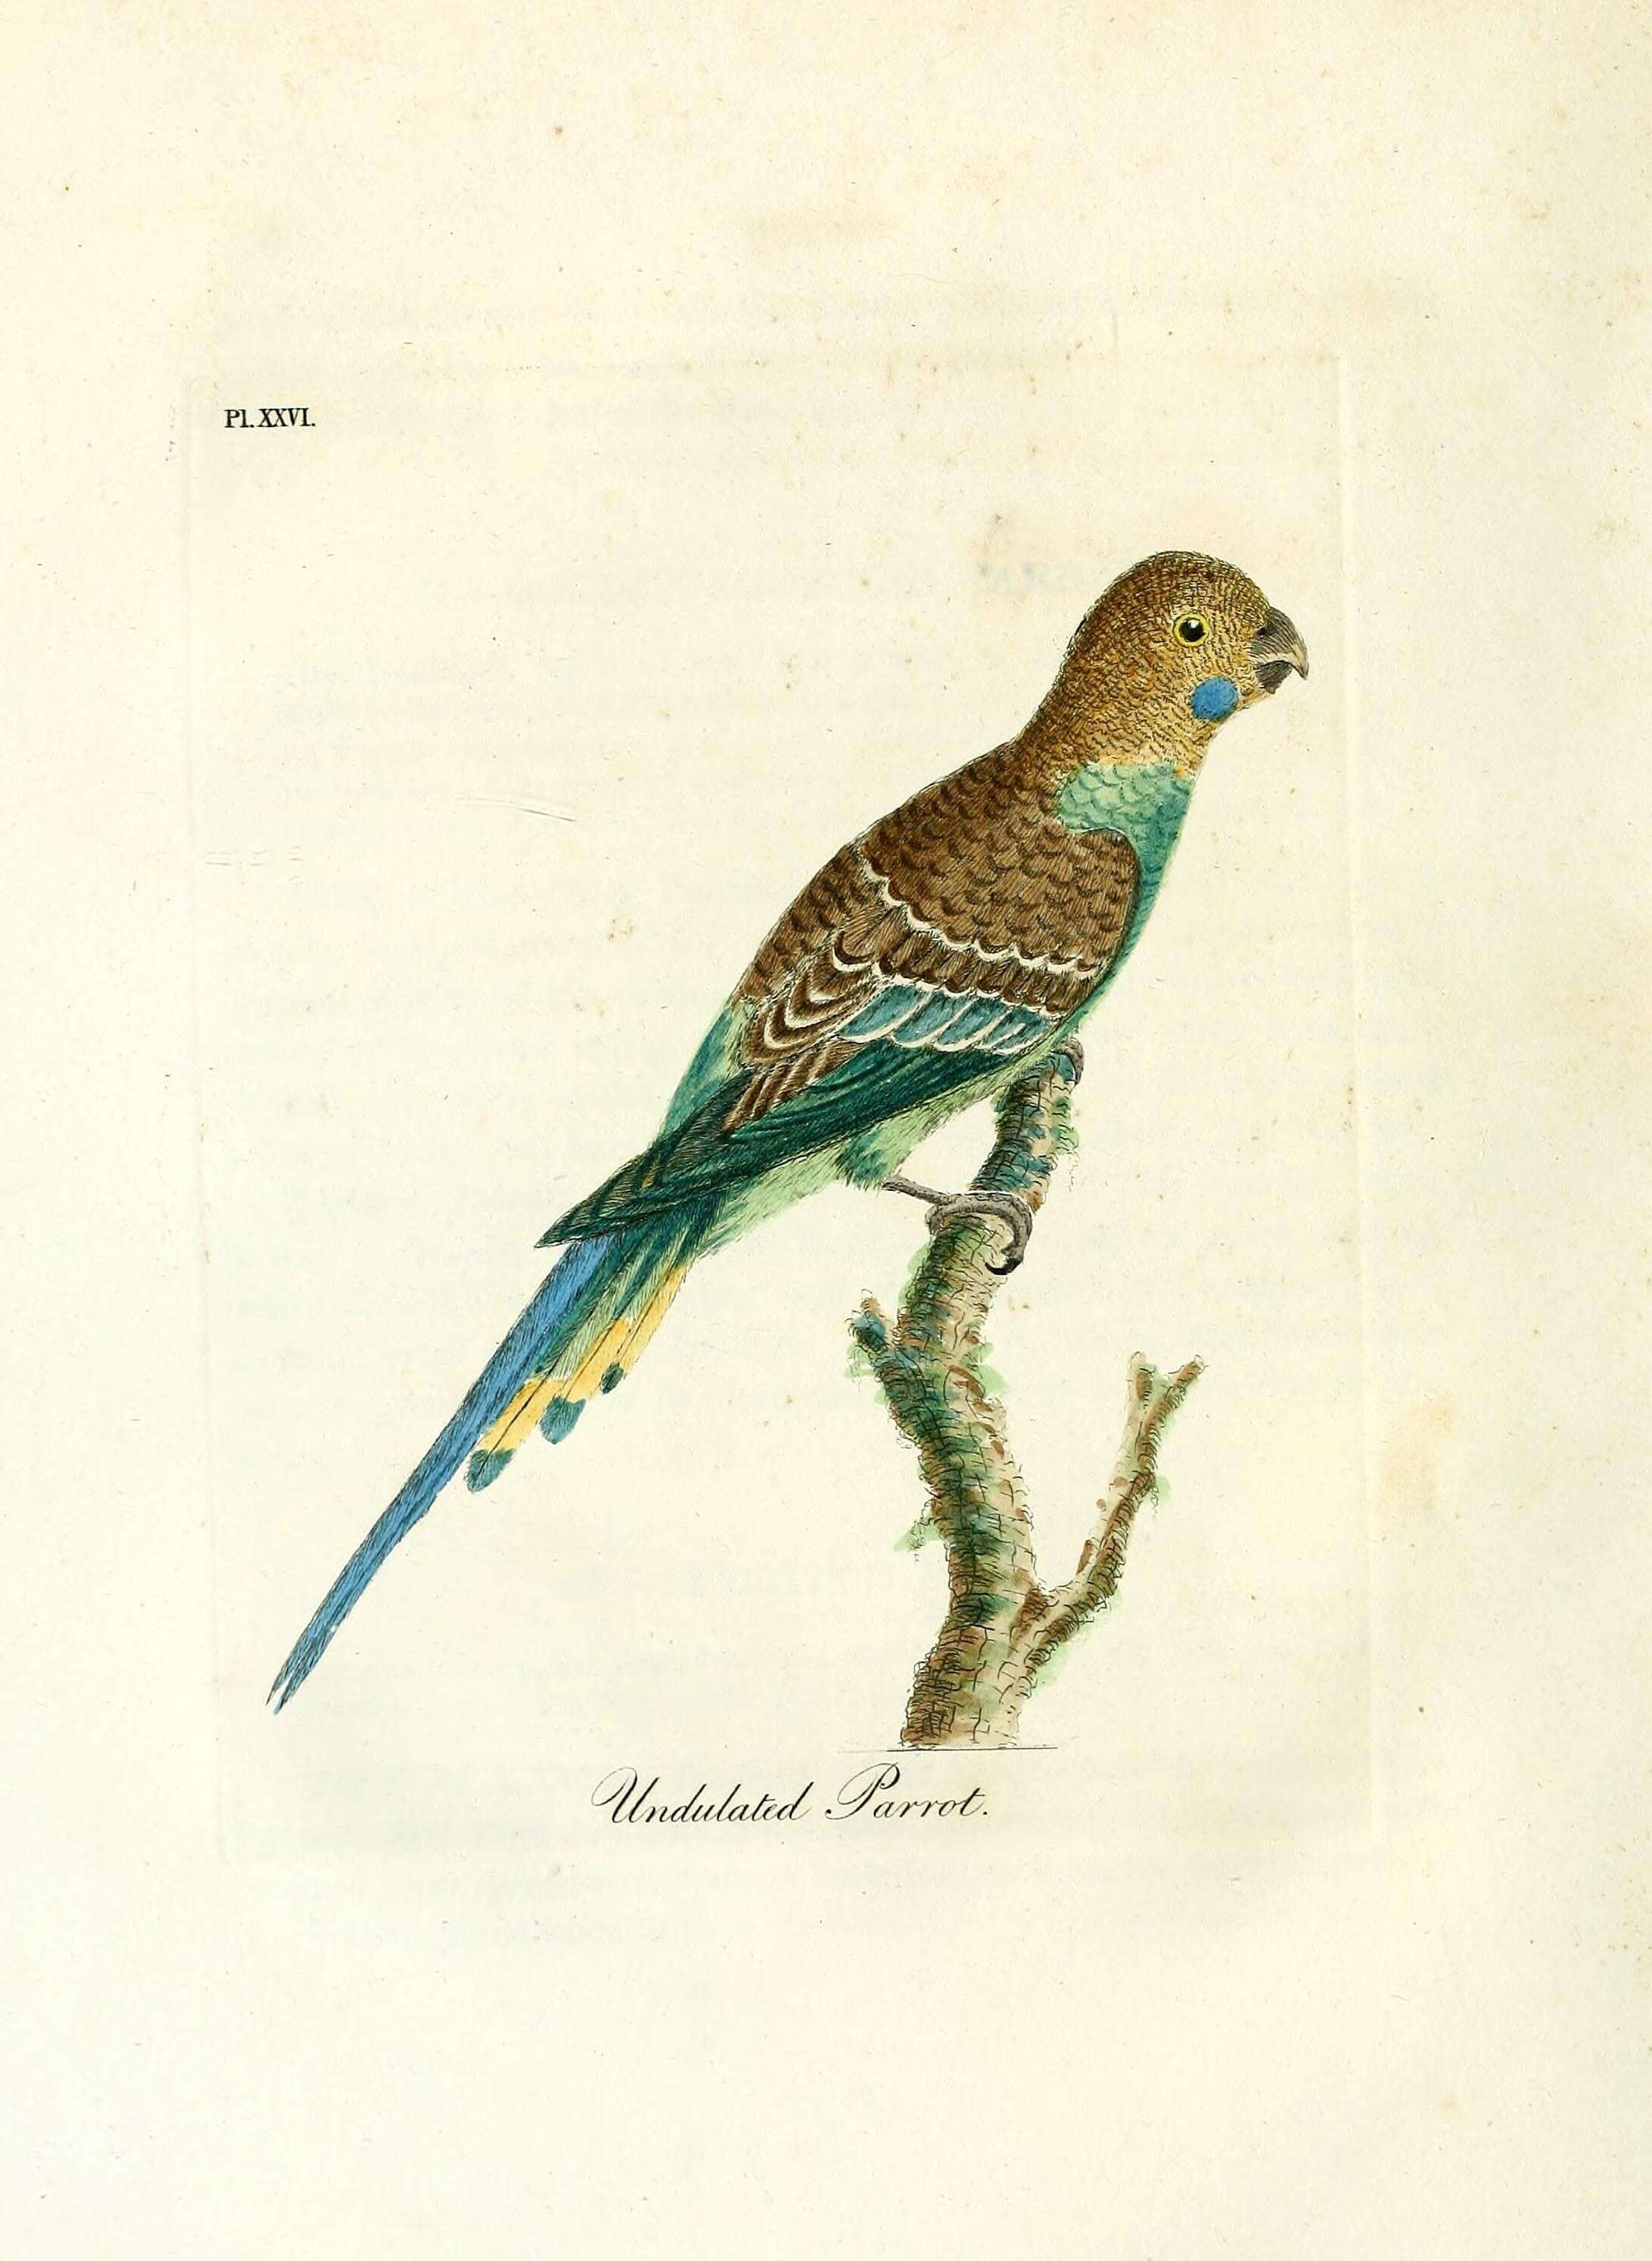 Image of Melopsittacus Gould 1840